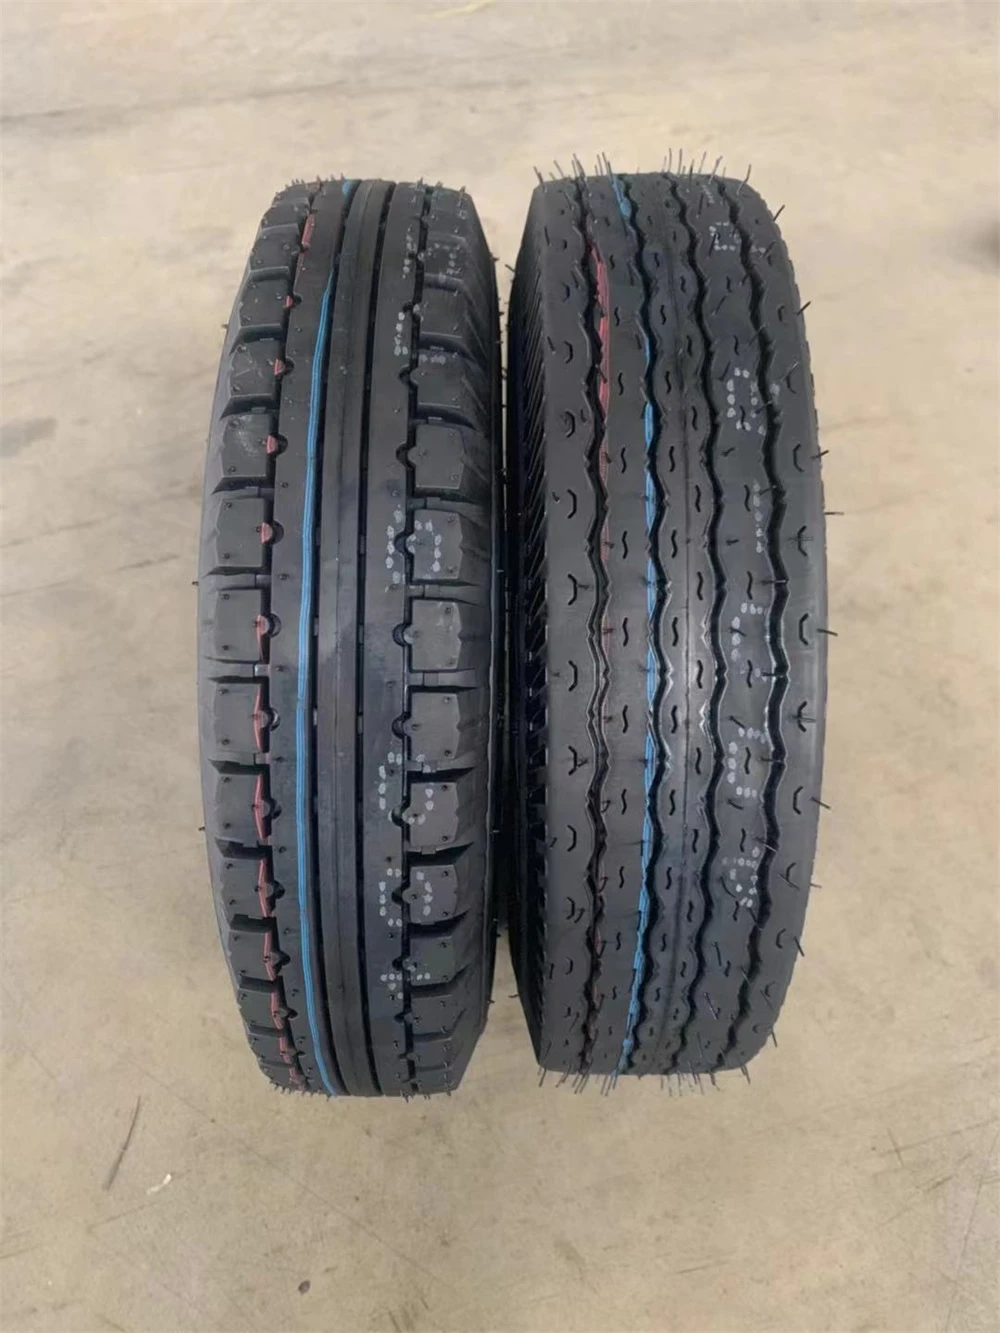 Factory Outlet High Quality 400-8 Rubber High Wear Resistance Motorcycle Tire Price